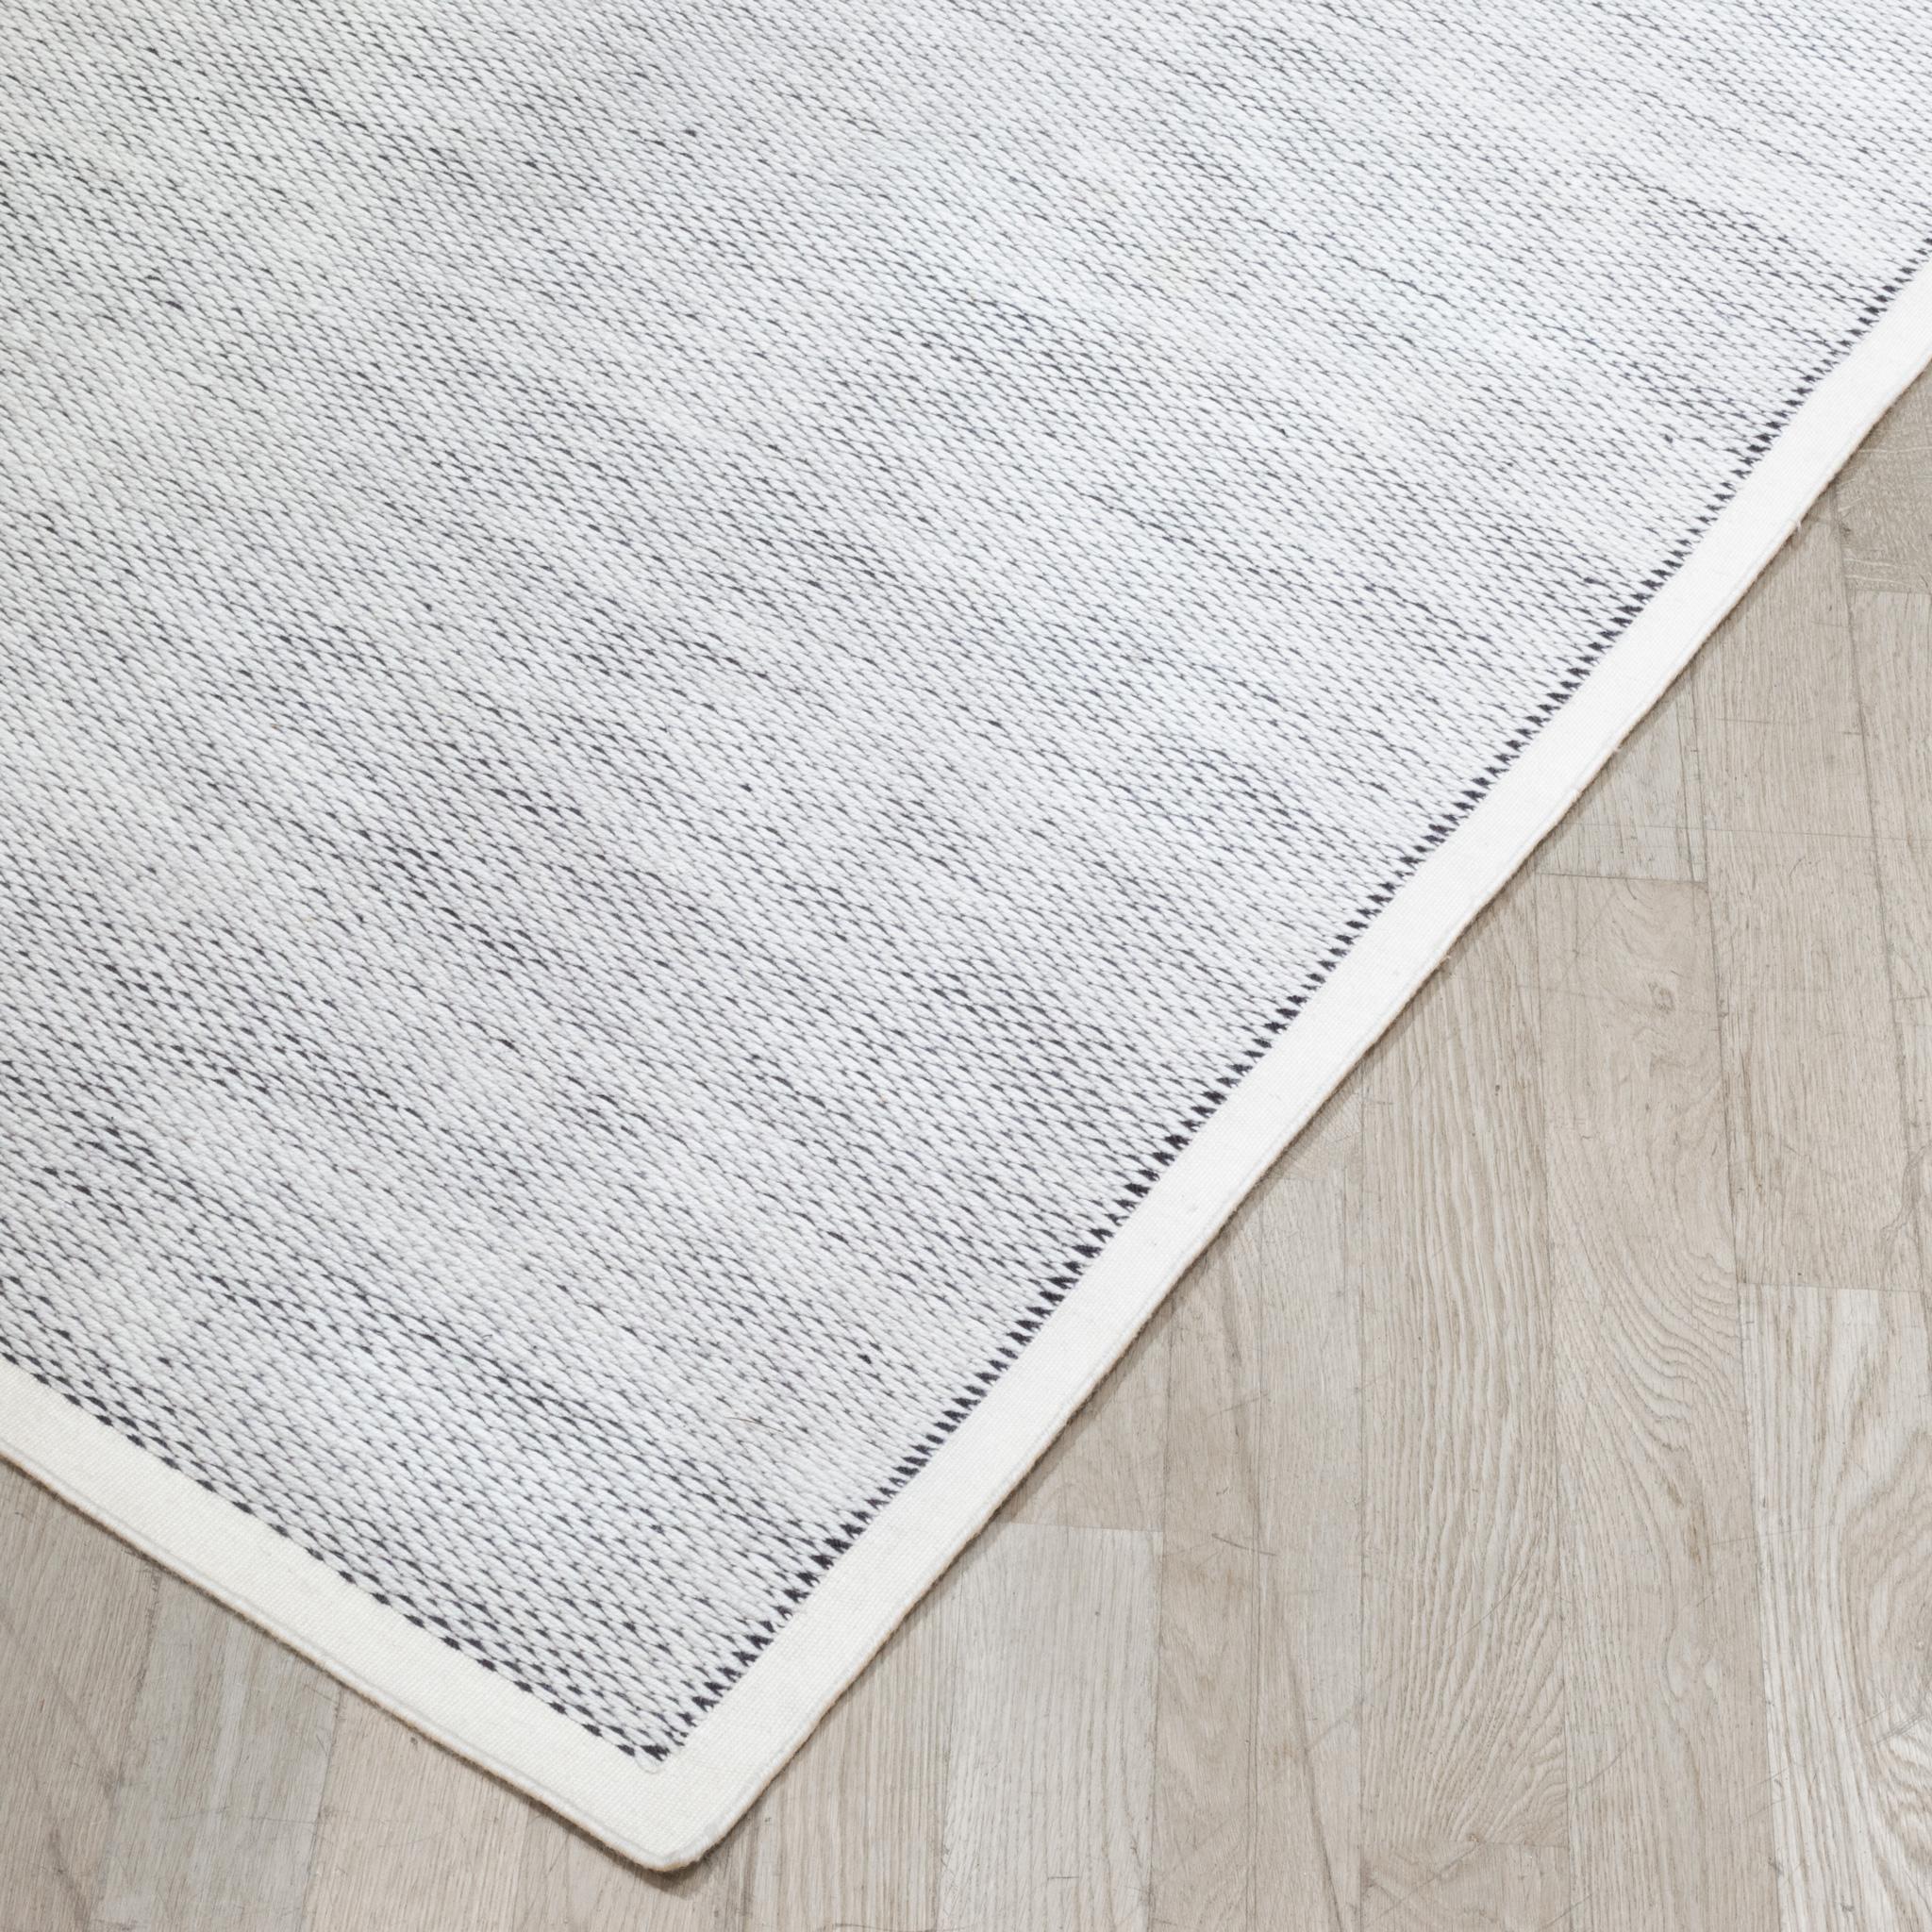 Hand-Woven 100% Merino Wool Lyxx Area Rug by Fells Andes 5' x 7' (FREE SHIPPING) For Sale